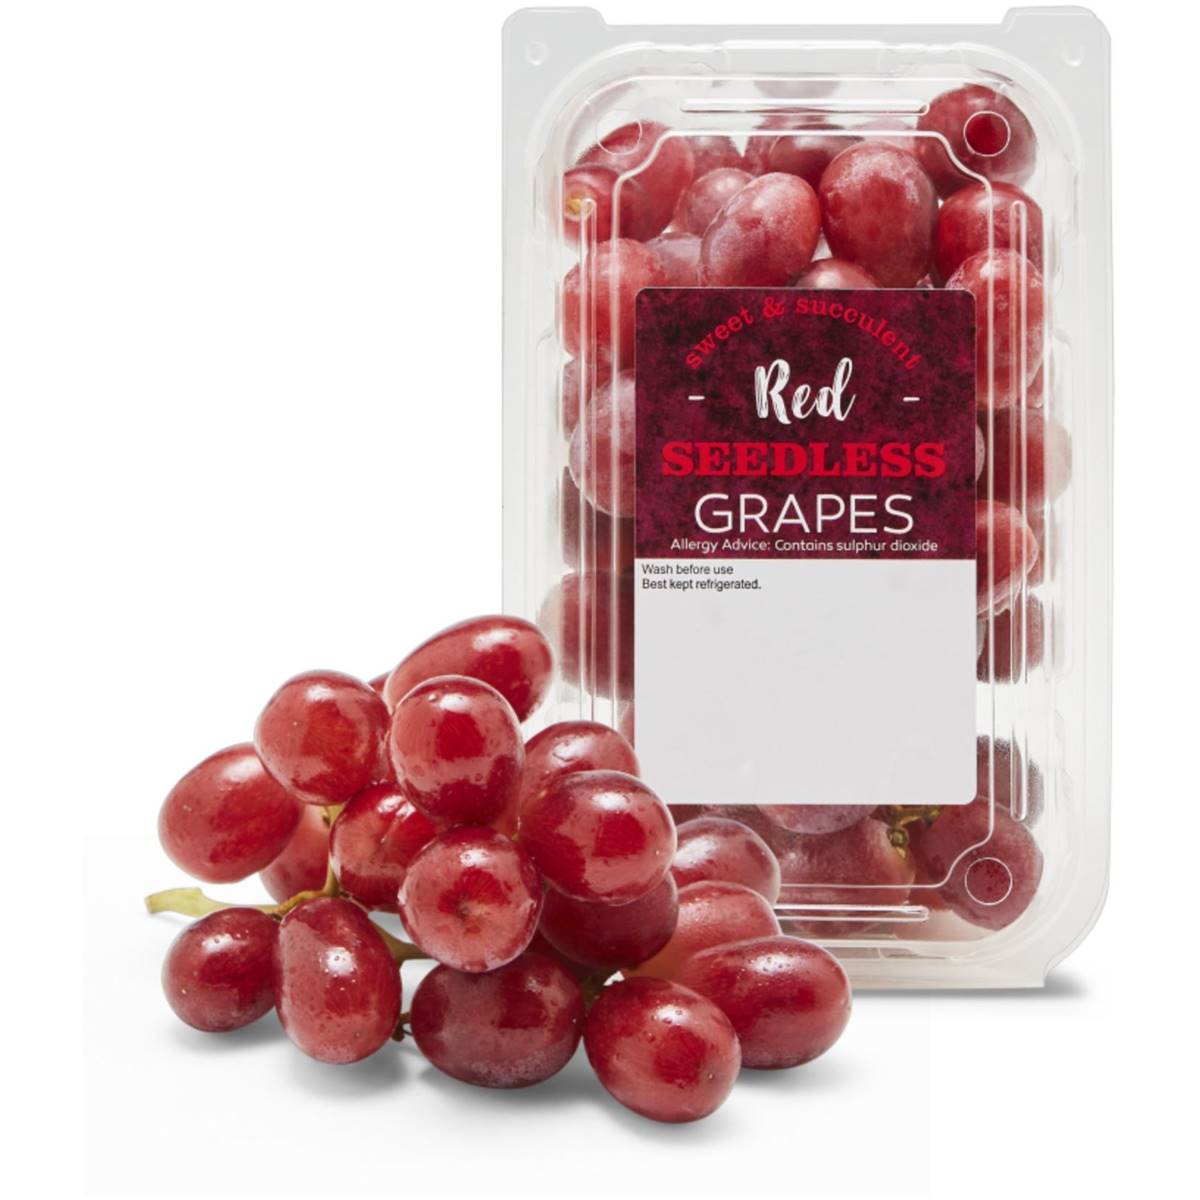 Calories in Woolworths Red Seedless Grapes